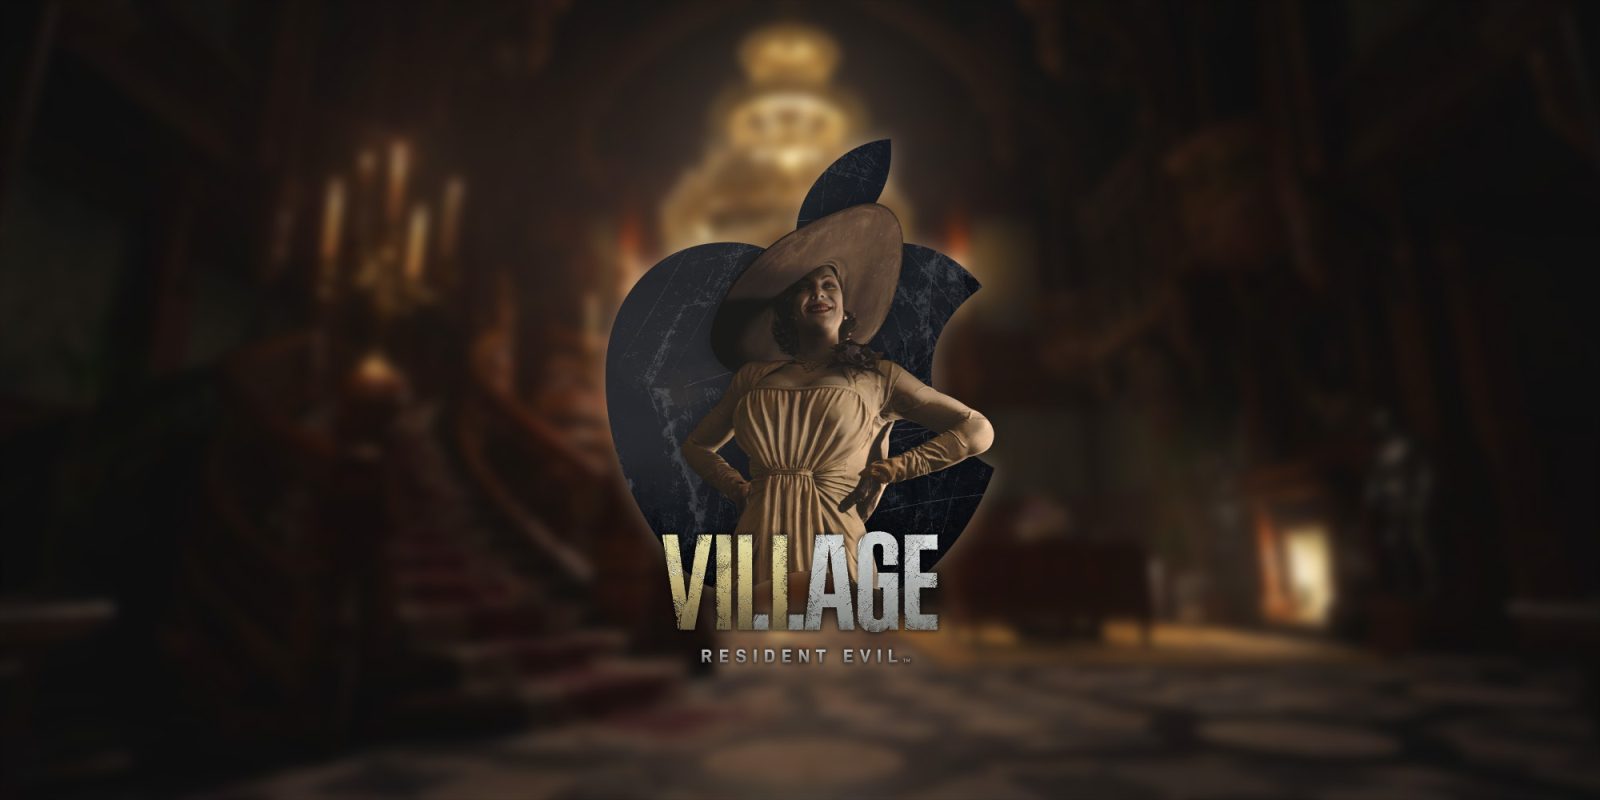 Popular 'Resident Evil Village' game comes to macOS exclusively for Apple Silicon Macs